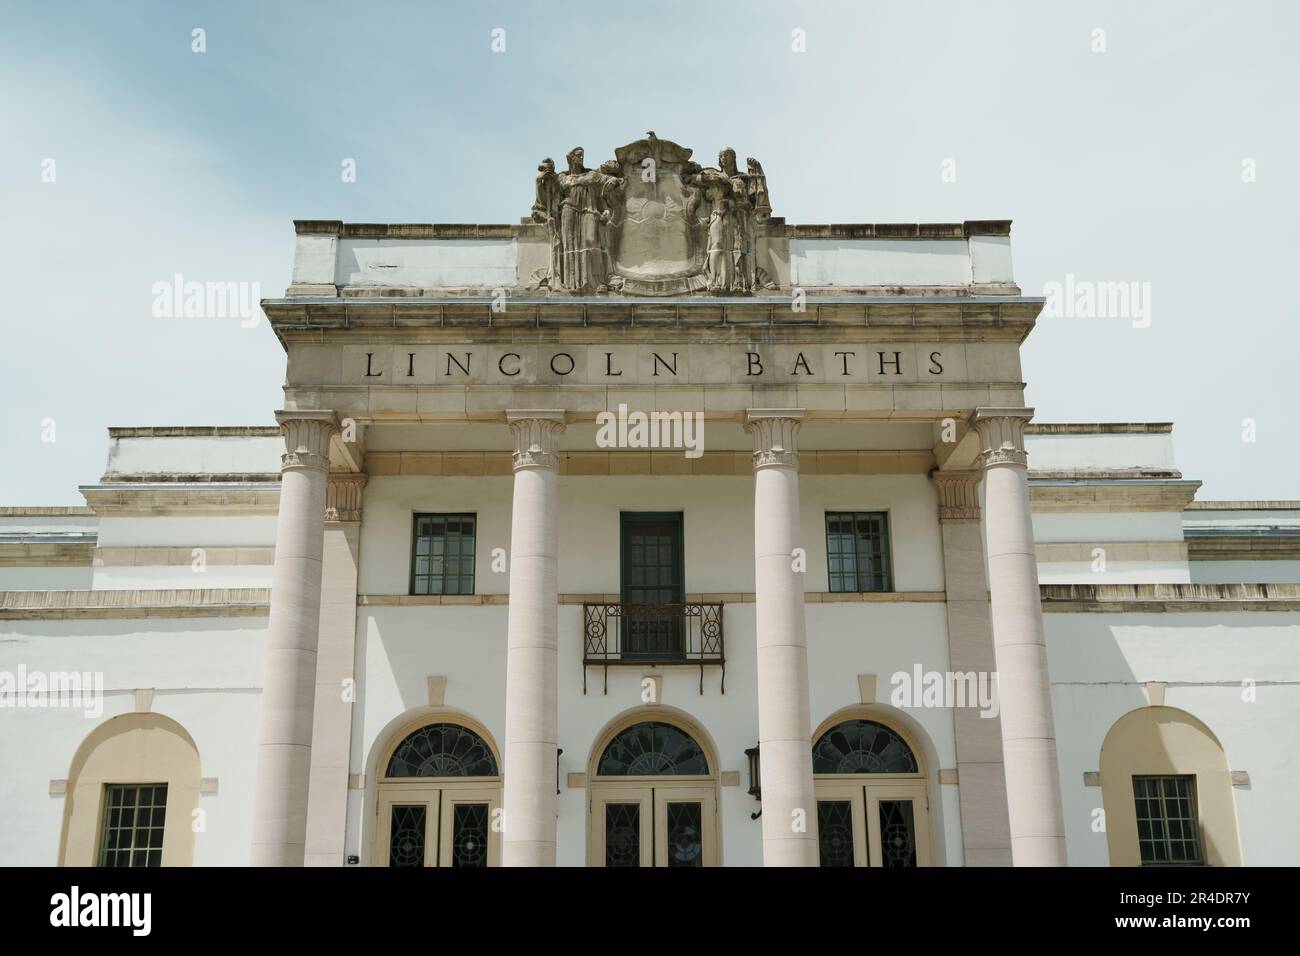 Lincoln Baths, Saratoga Springs, New York Banque D'Images